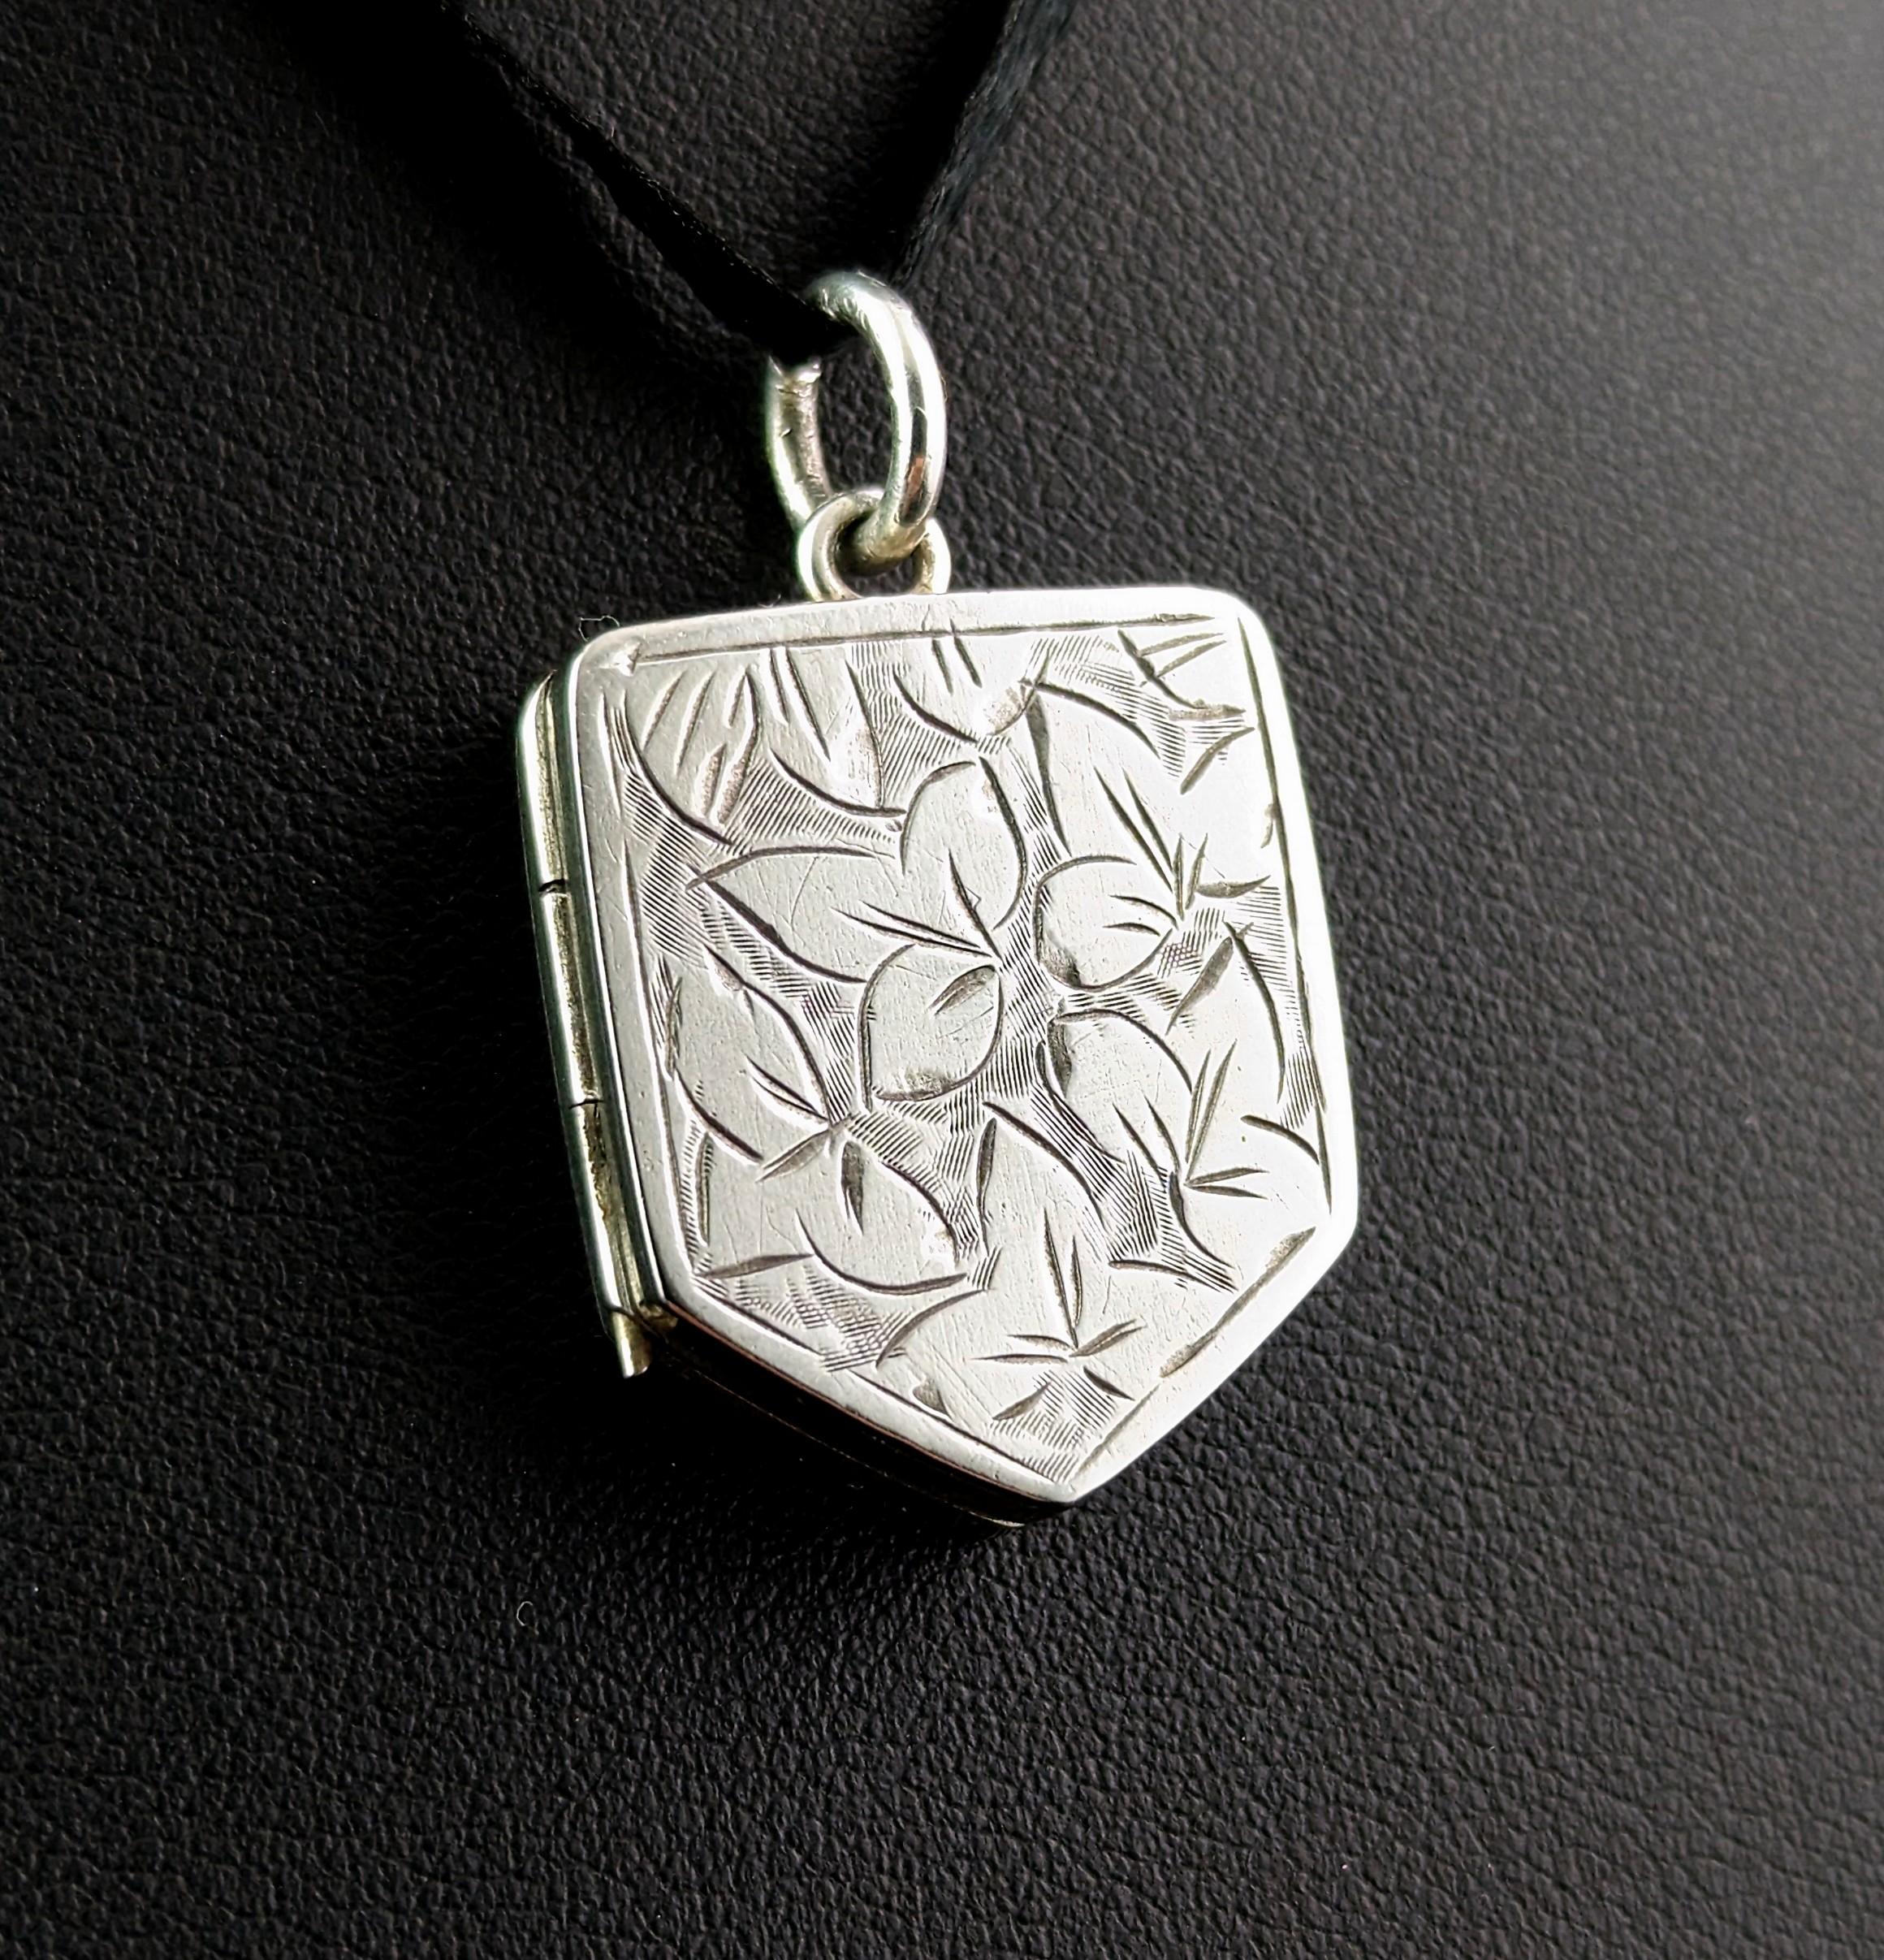 This beautiful antique Victorian sterling silver locket pendant is so decorative and unique with its attractive nature inspired design.

It is engraved to the front in the aesthetic manner with leaves and the locket is a lovely shield shape.

It has